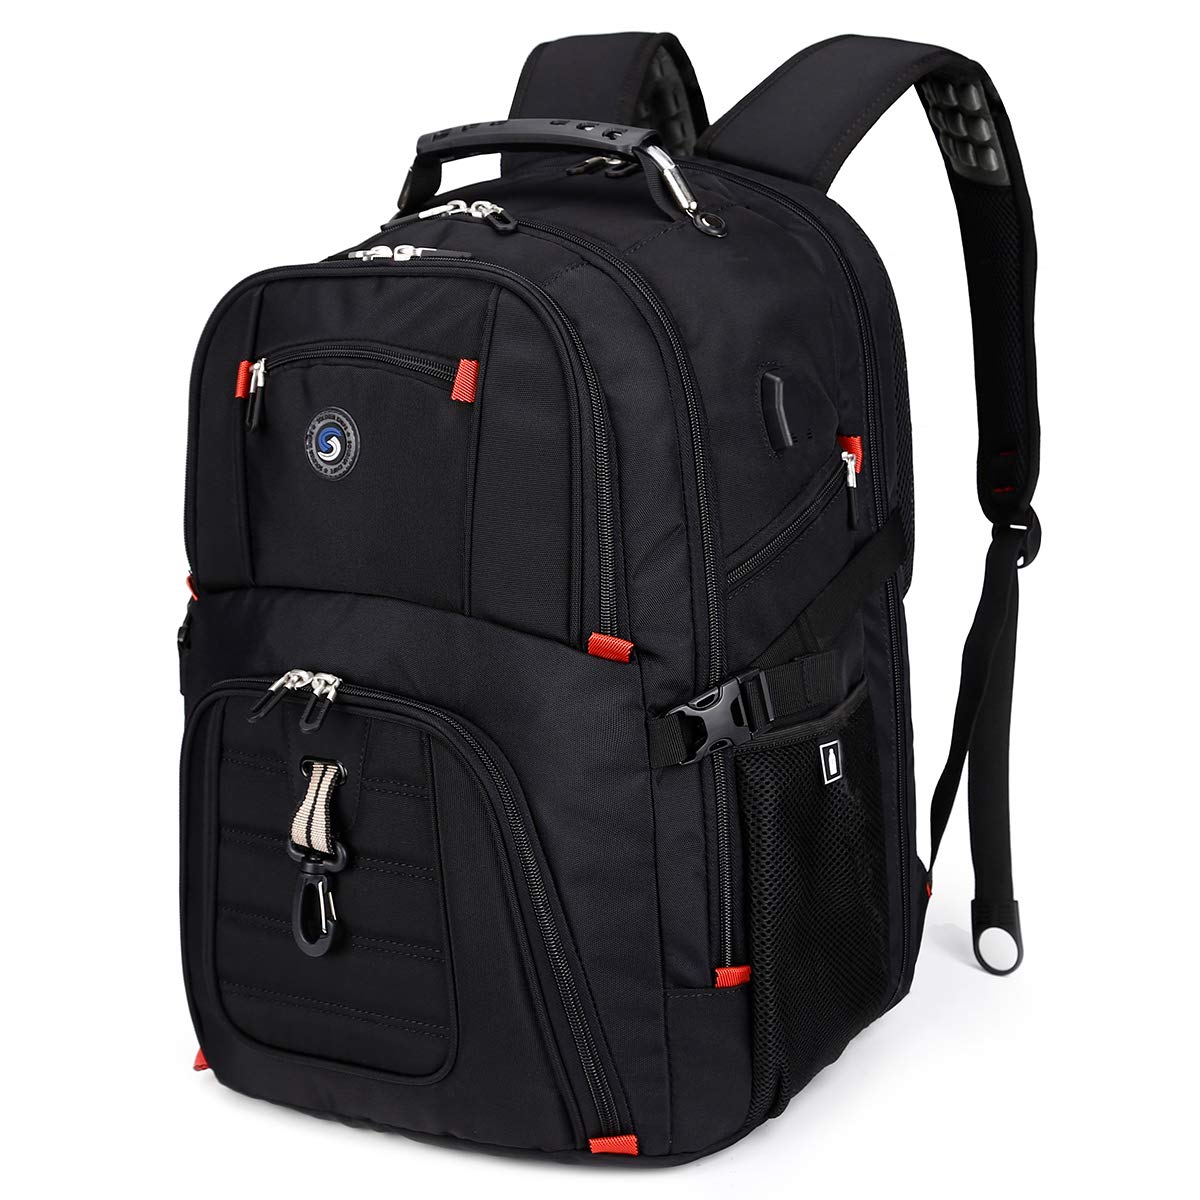 Extra Large 52L Travel Laptop Backpack with USB Charging Port